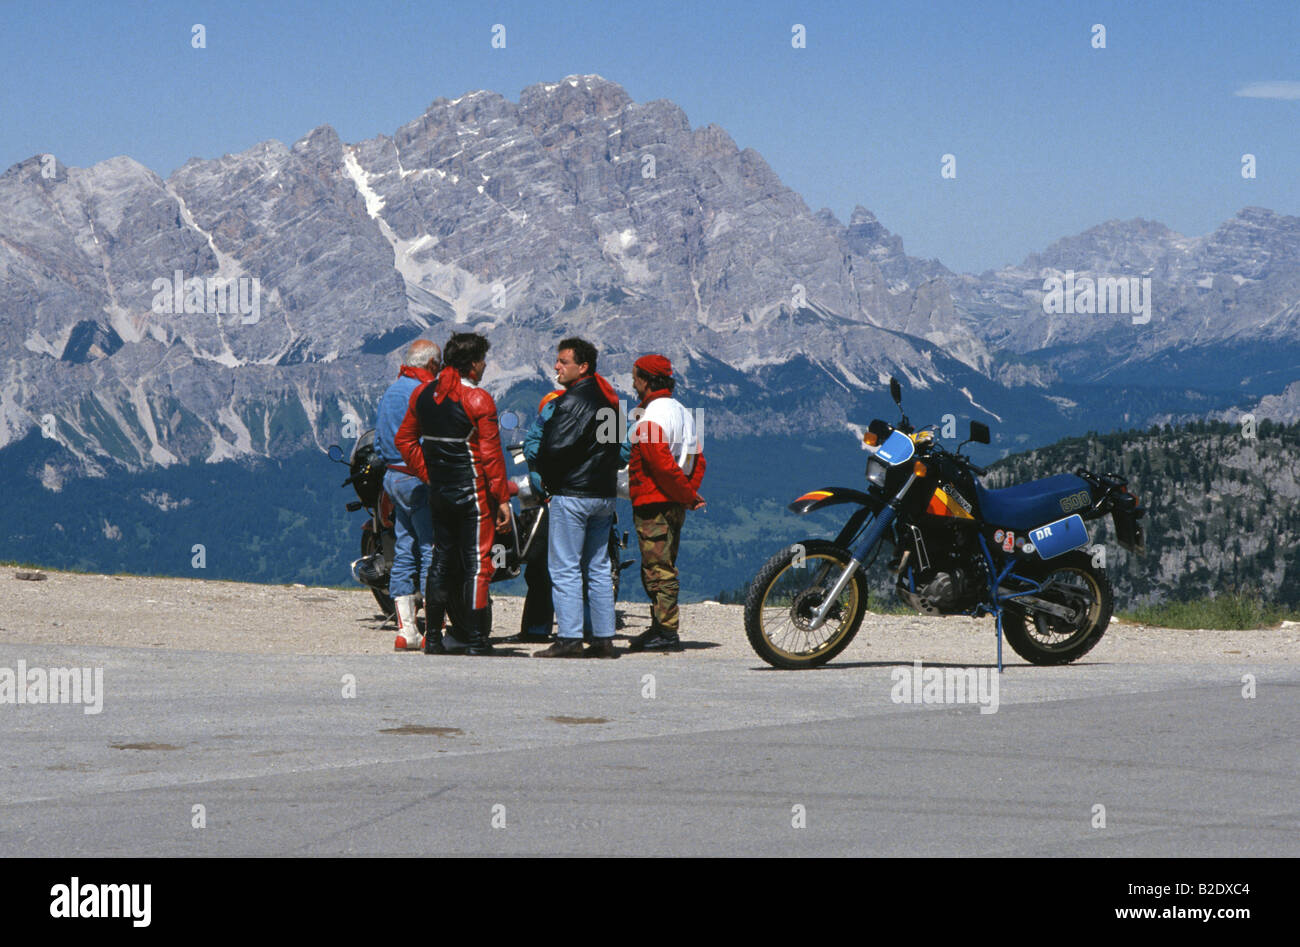 Group of motorcyclists rest and talk at the summit of Passo Giau in the Dolomite mountains of northern Italy Stock Photo